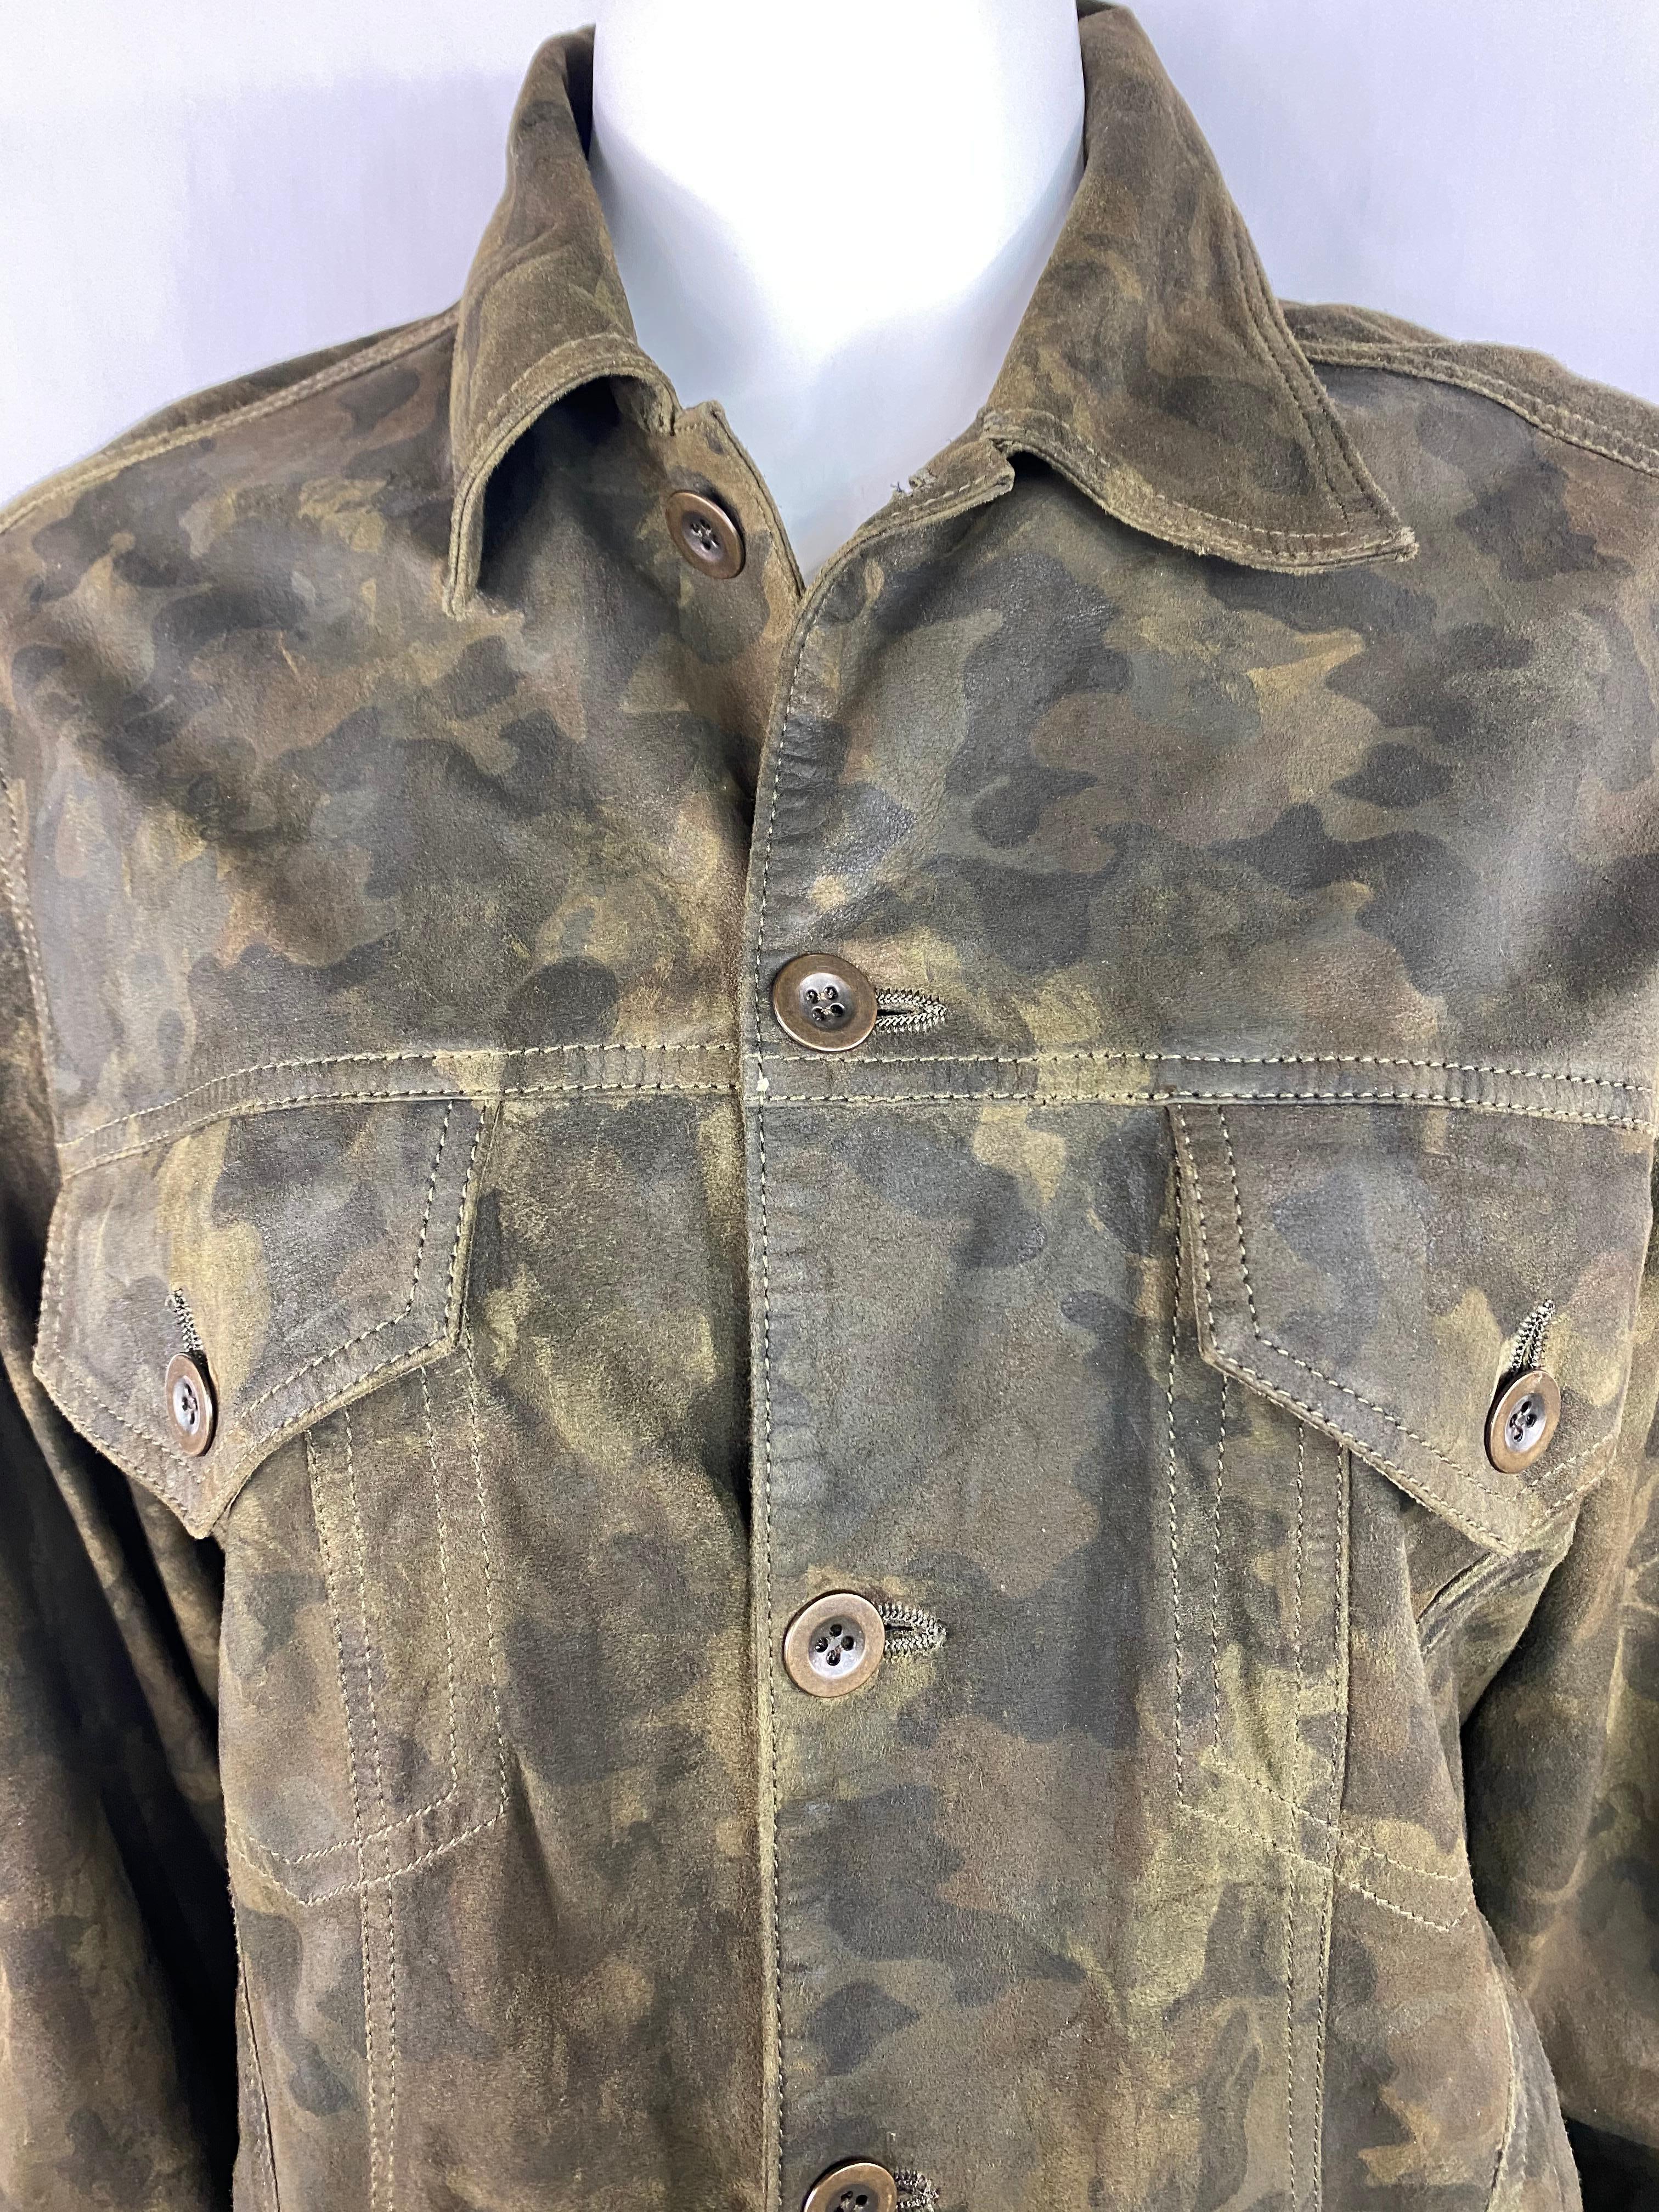 Product details:

The jacket is made out of 100% goat leather and it feels like suede, featuring army camouflage print, collar, golt tone hardware, front button closure. 